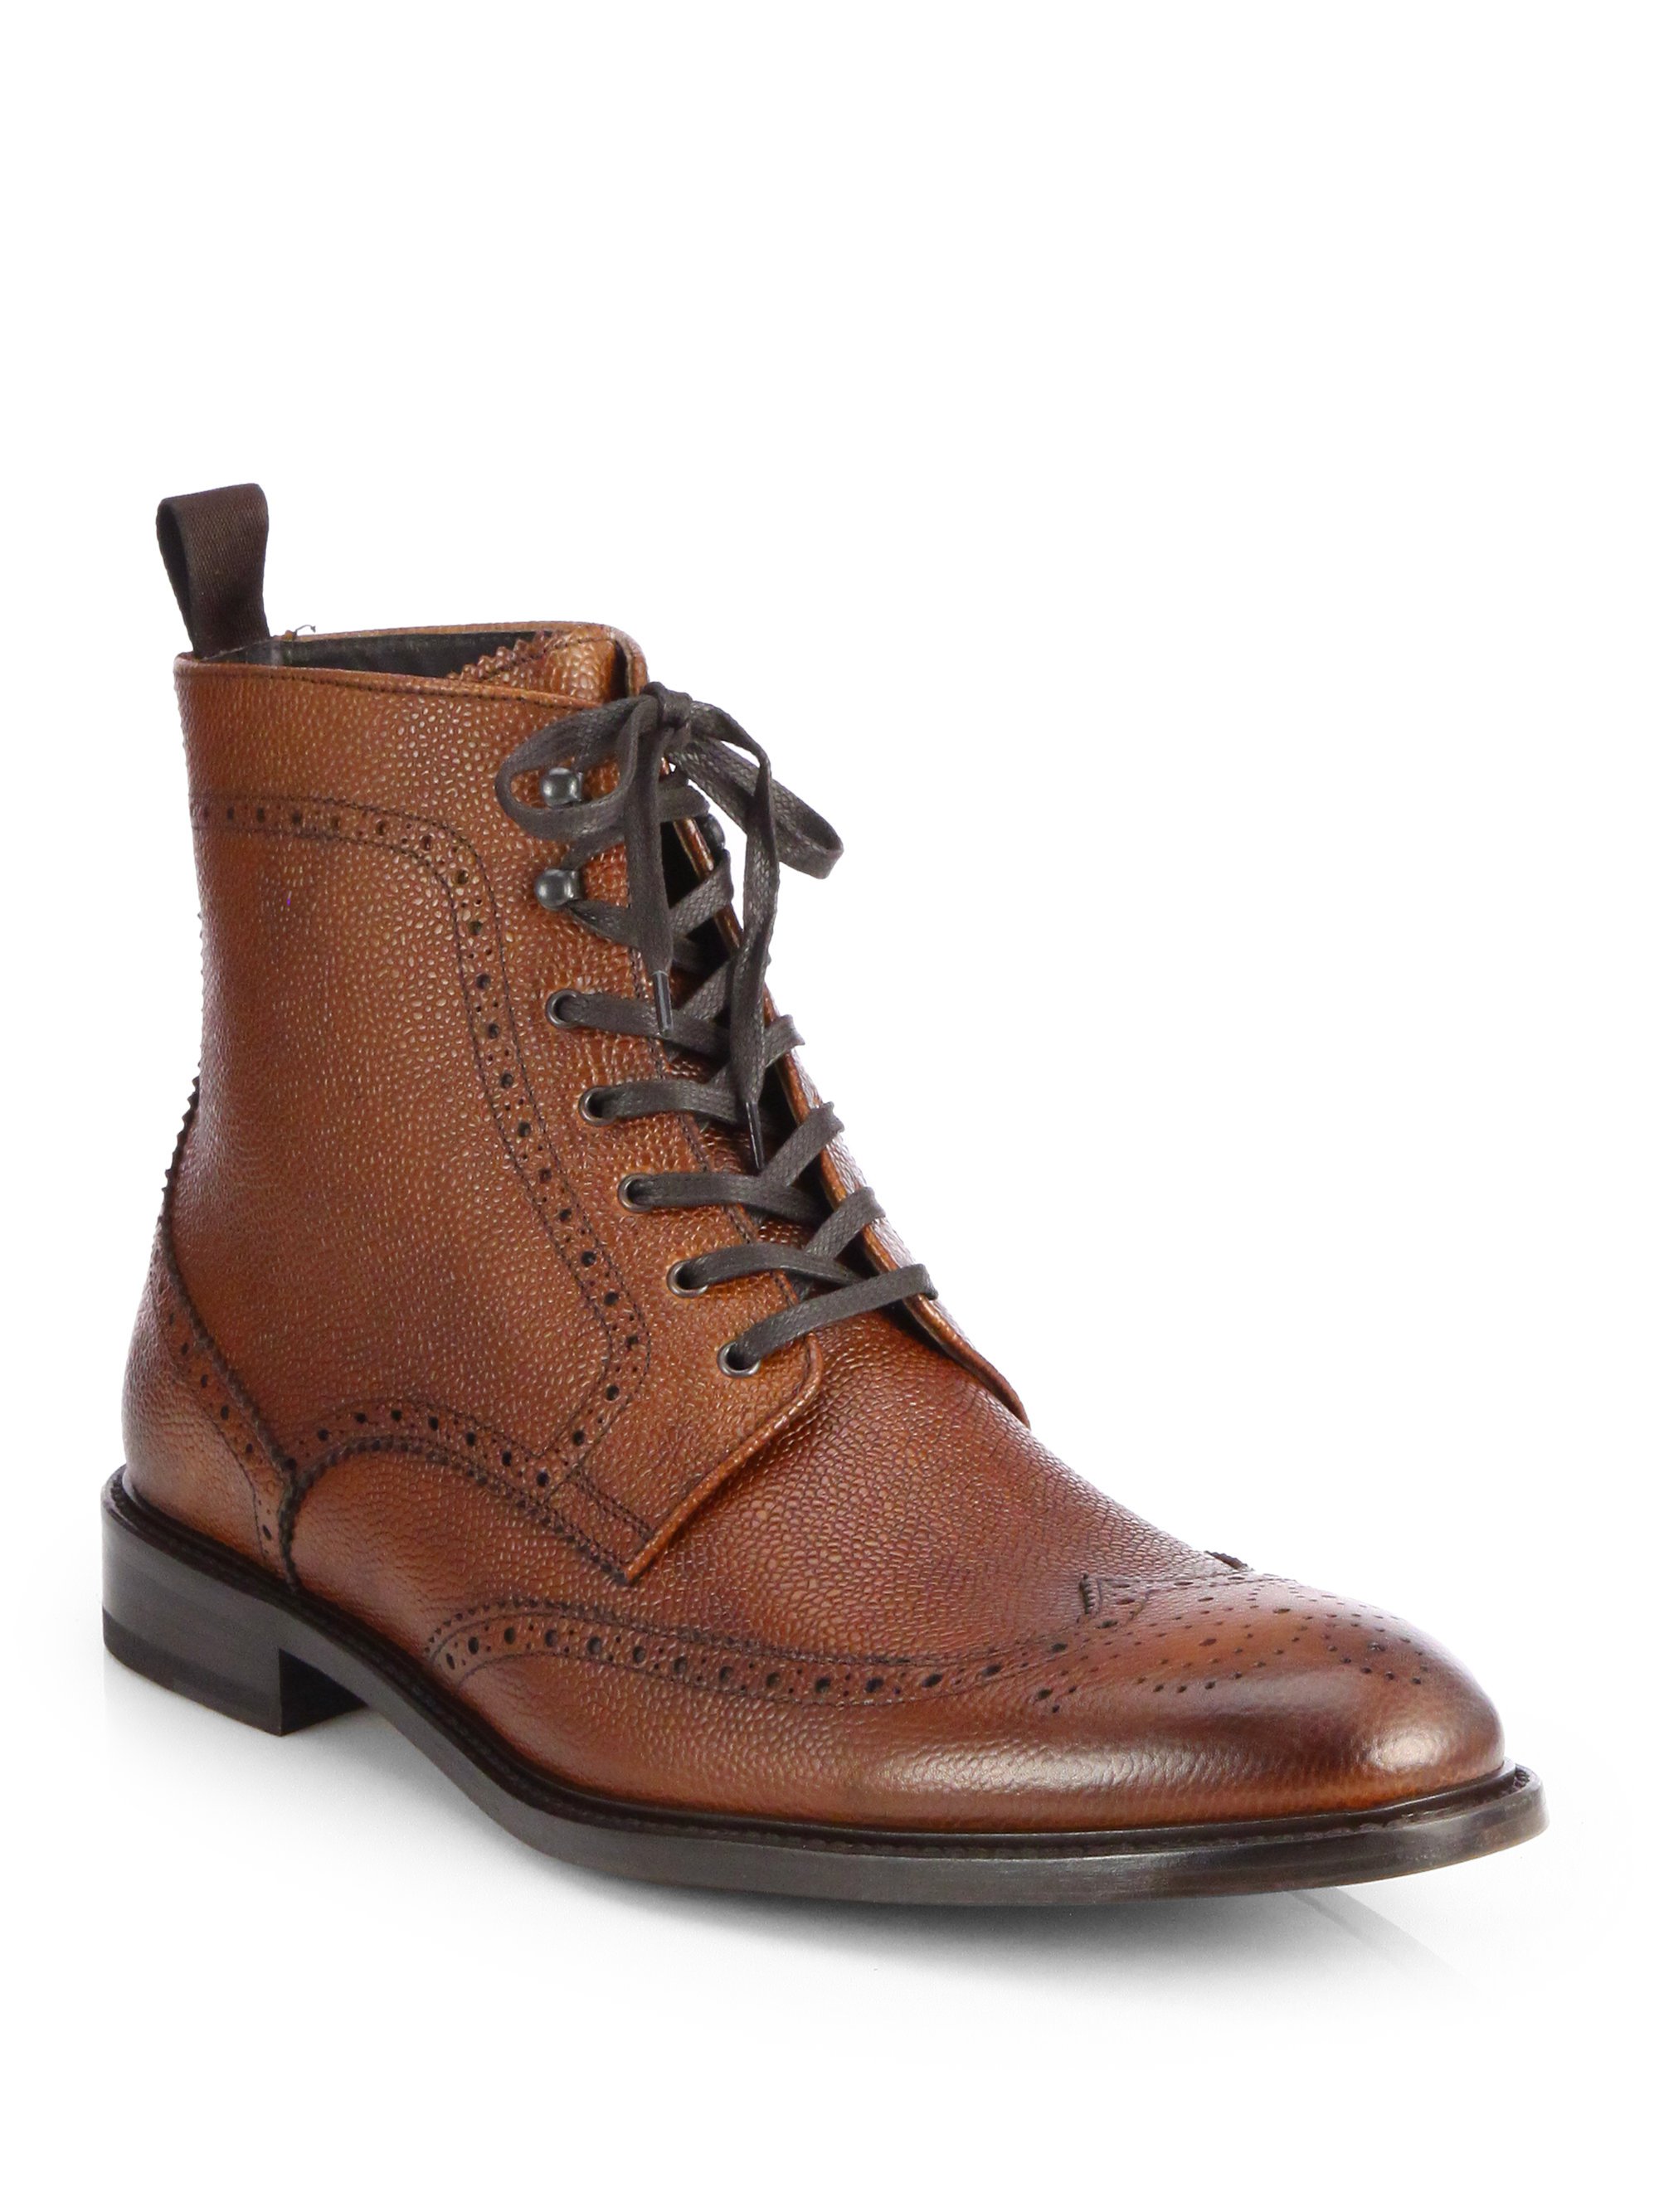 Lyst - To Boot York Pebbled Leather Wingtip Ankle Boot in Brown for Men